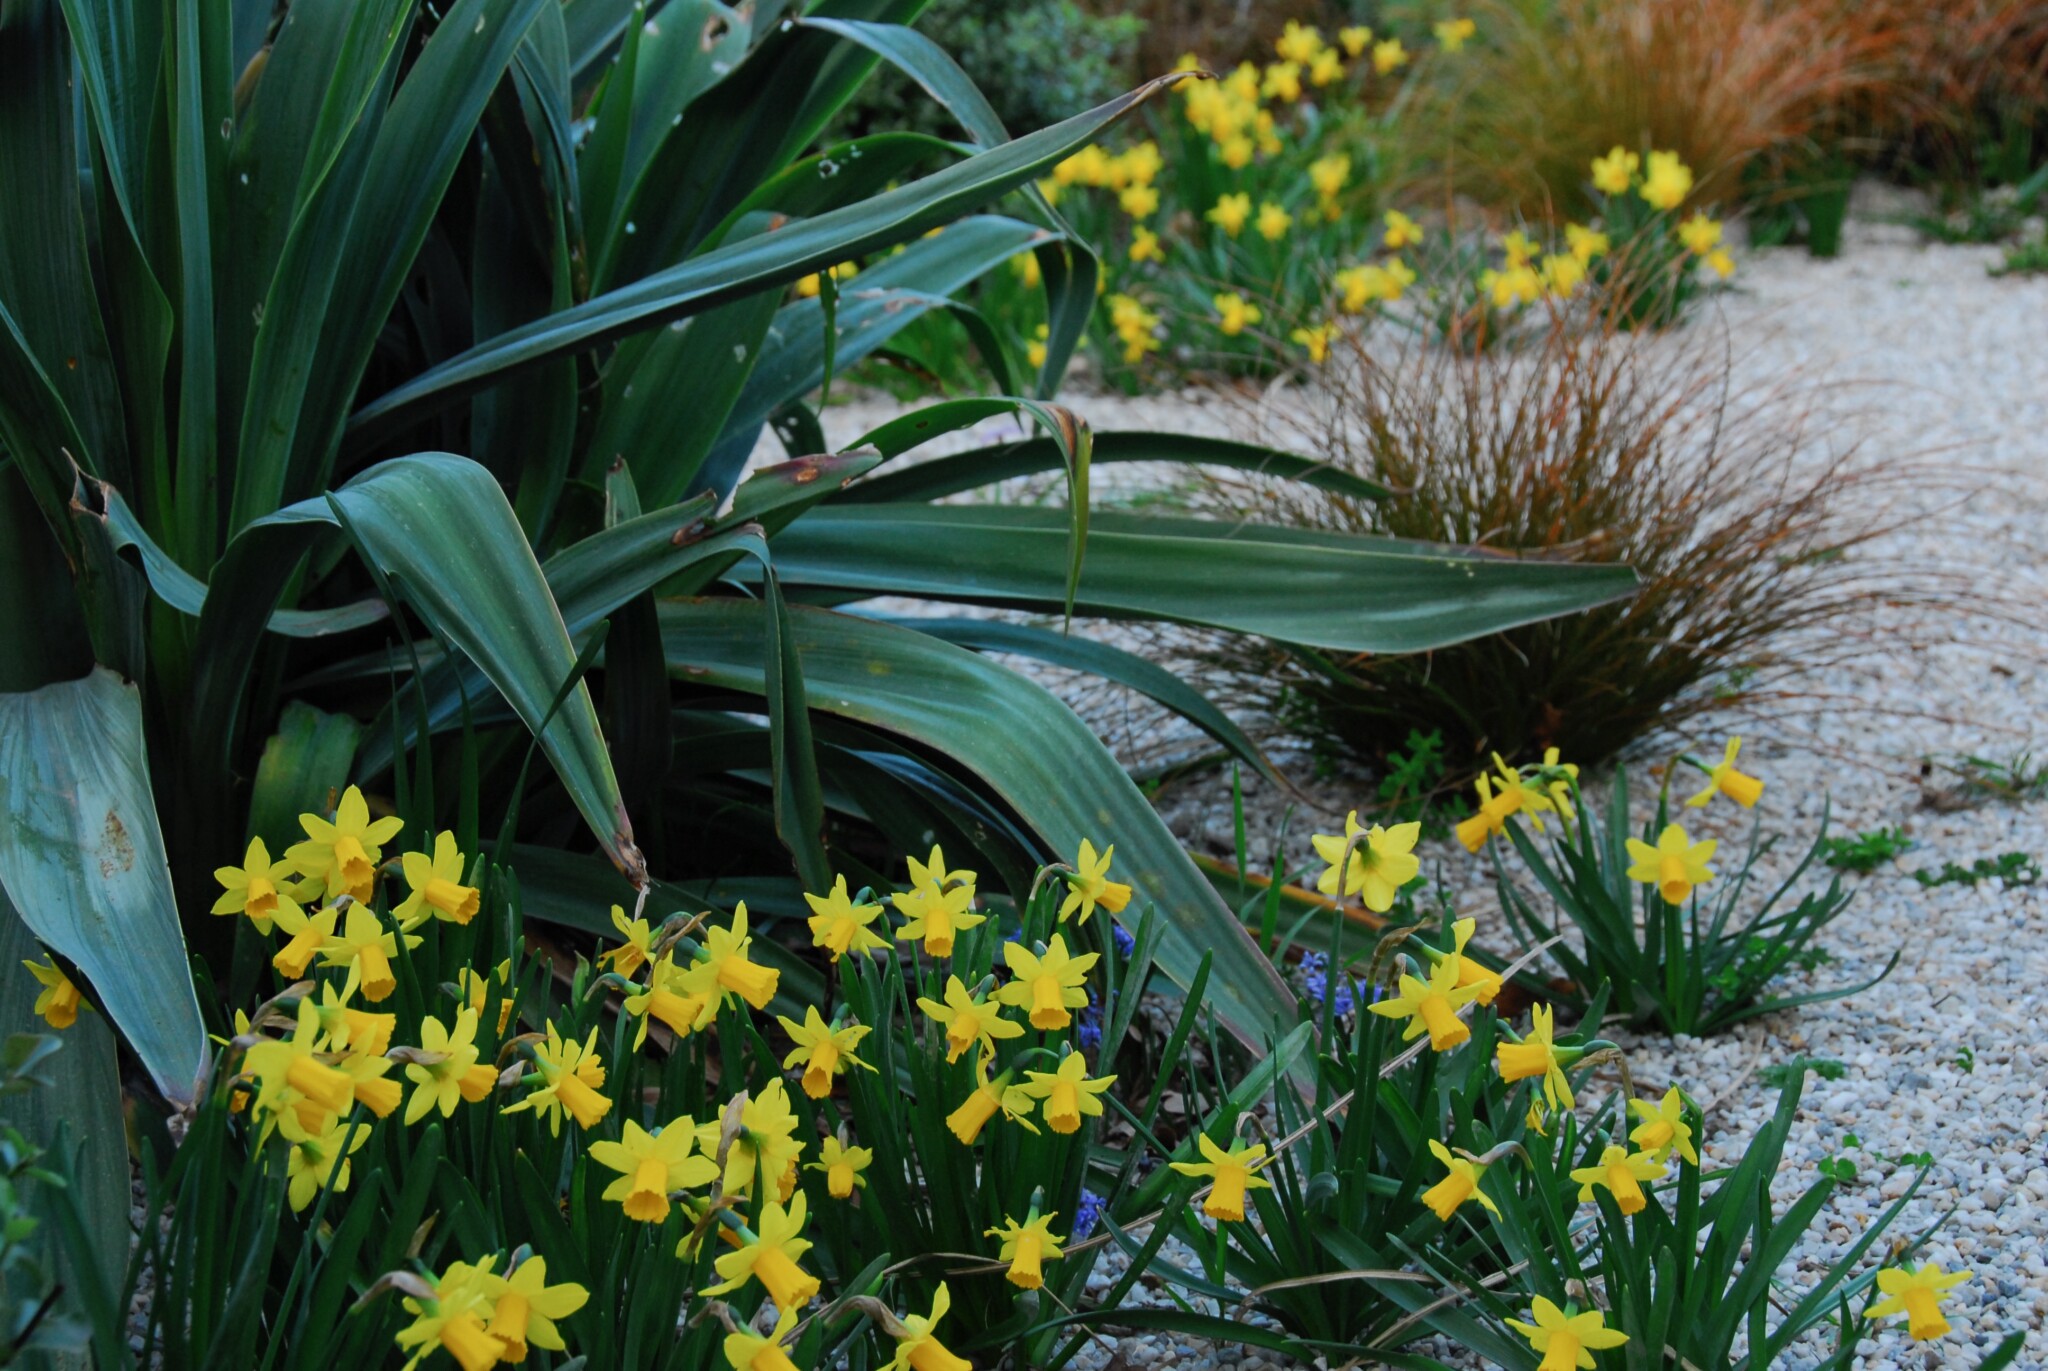 PLANT OF THE WEEK #70: Narcissus ‘Tete-a-Tete’